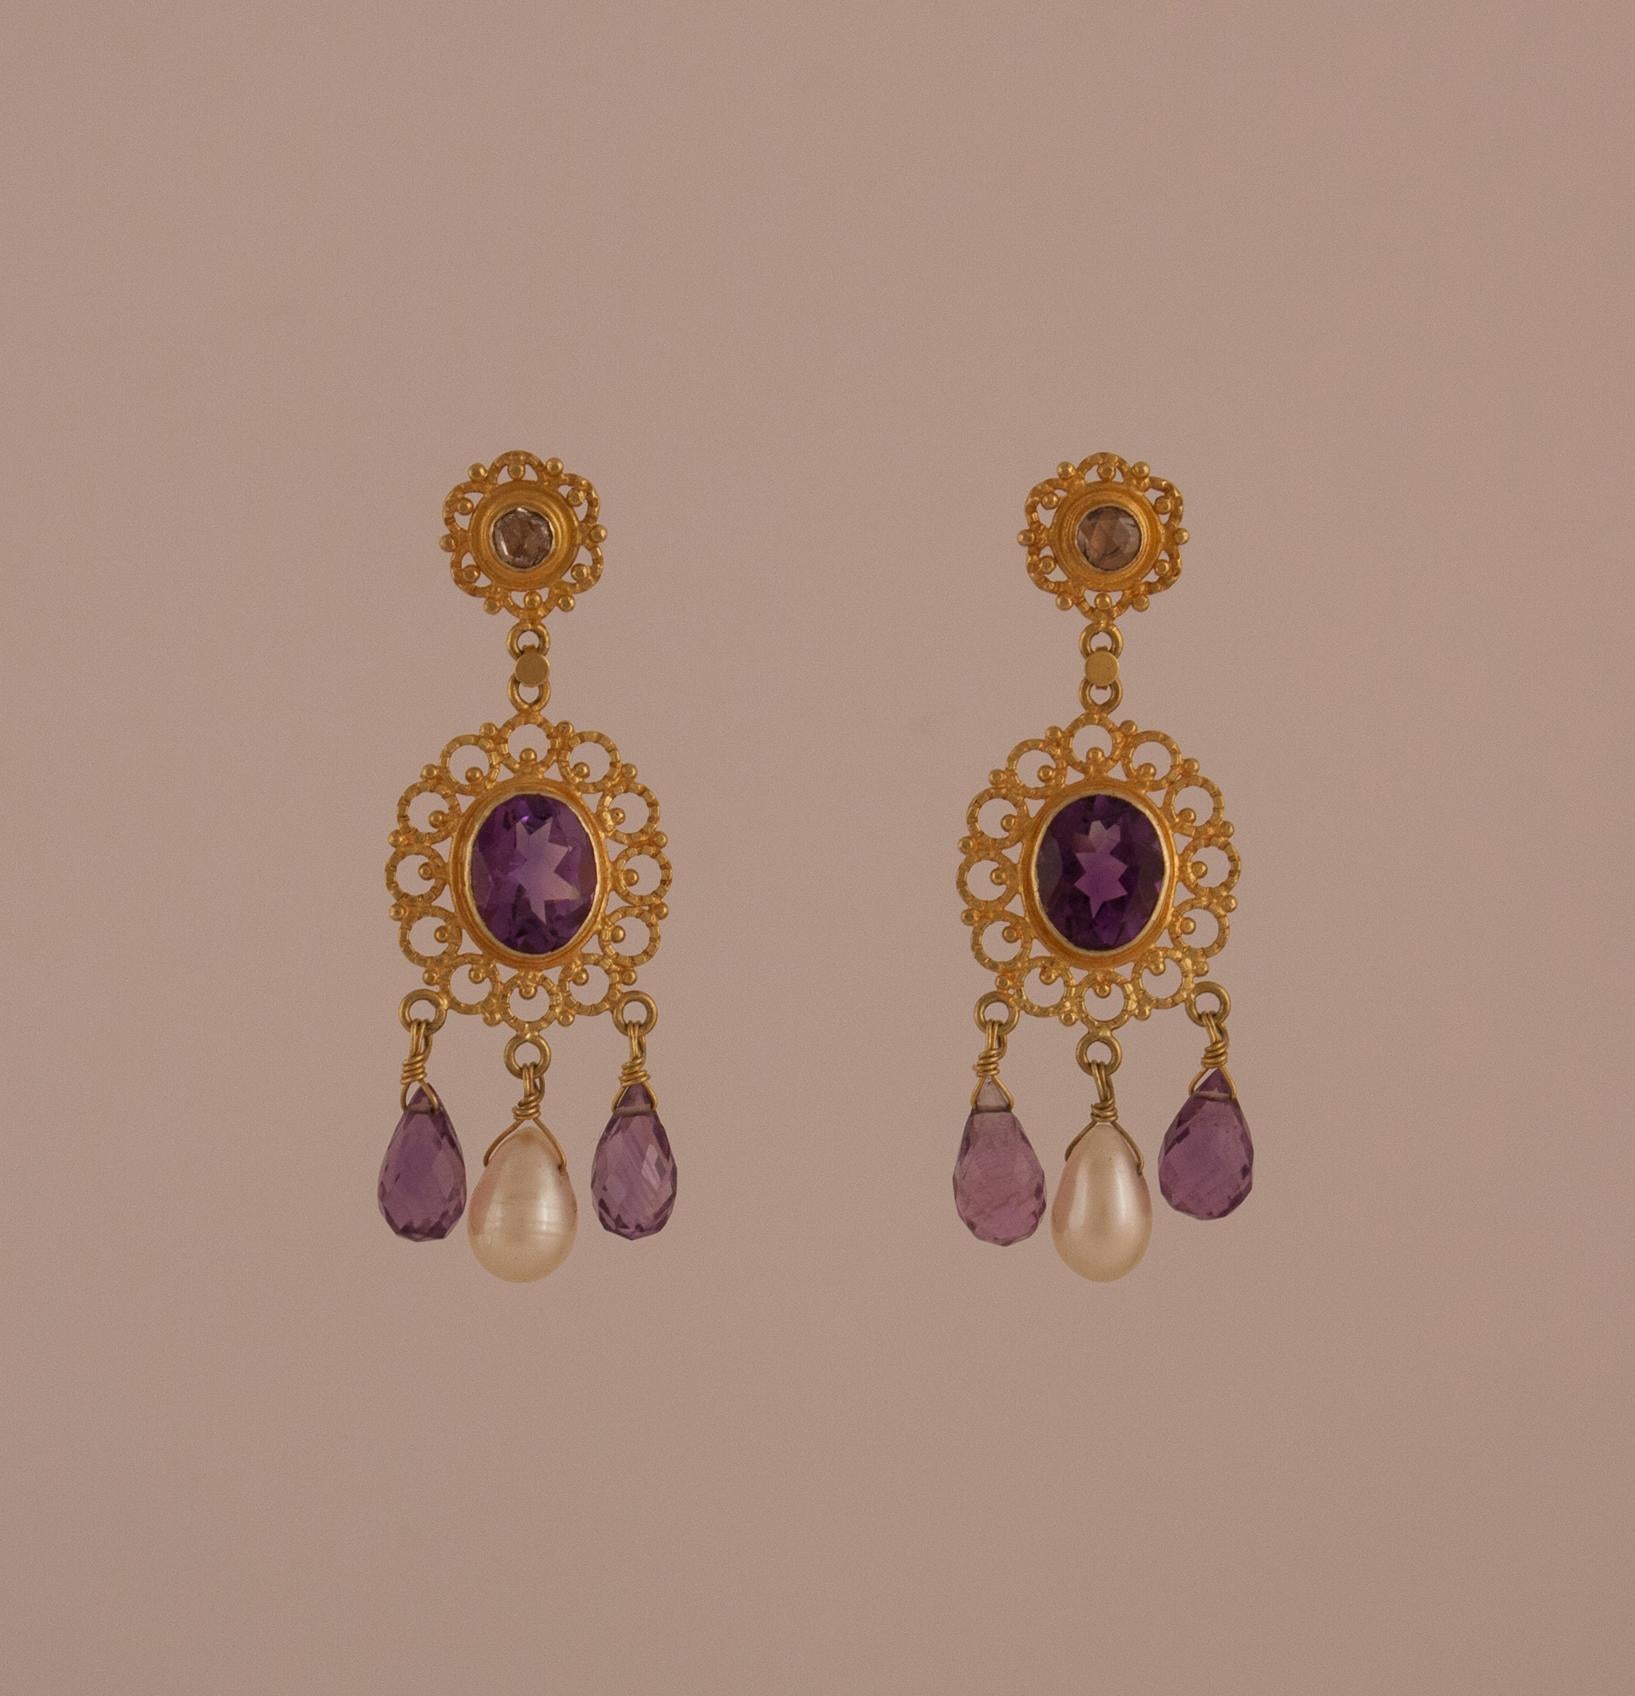 Faceted amethysts and rose cut diamonds are the centerpieces of these intricately hand tooled pair of 18 karat gold Victorian style chandelier earrings.     